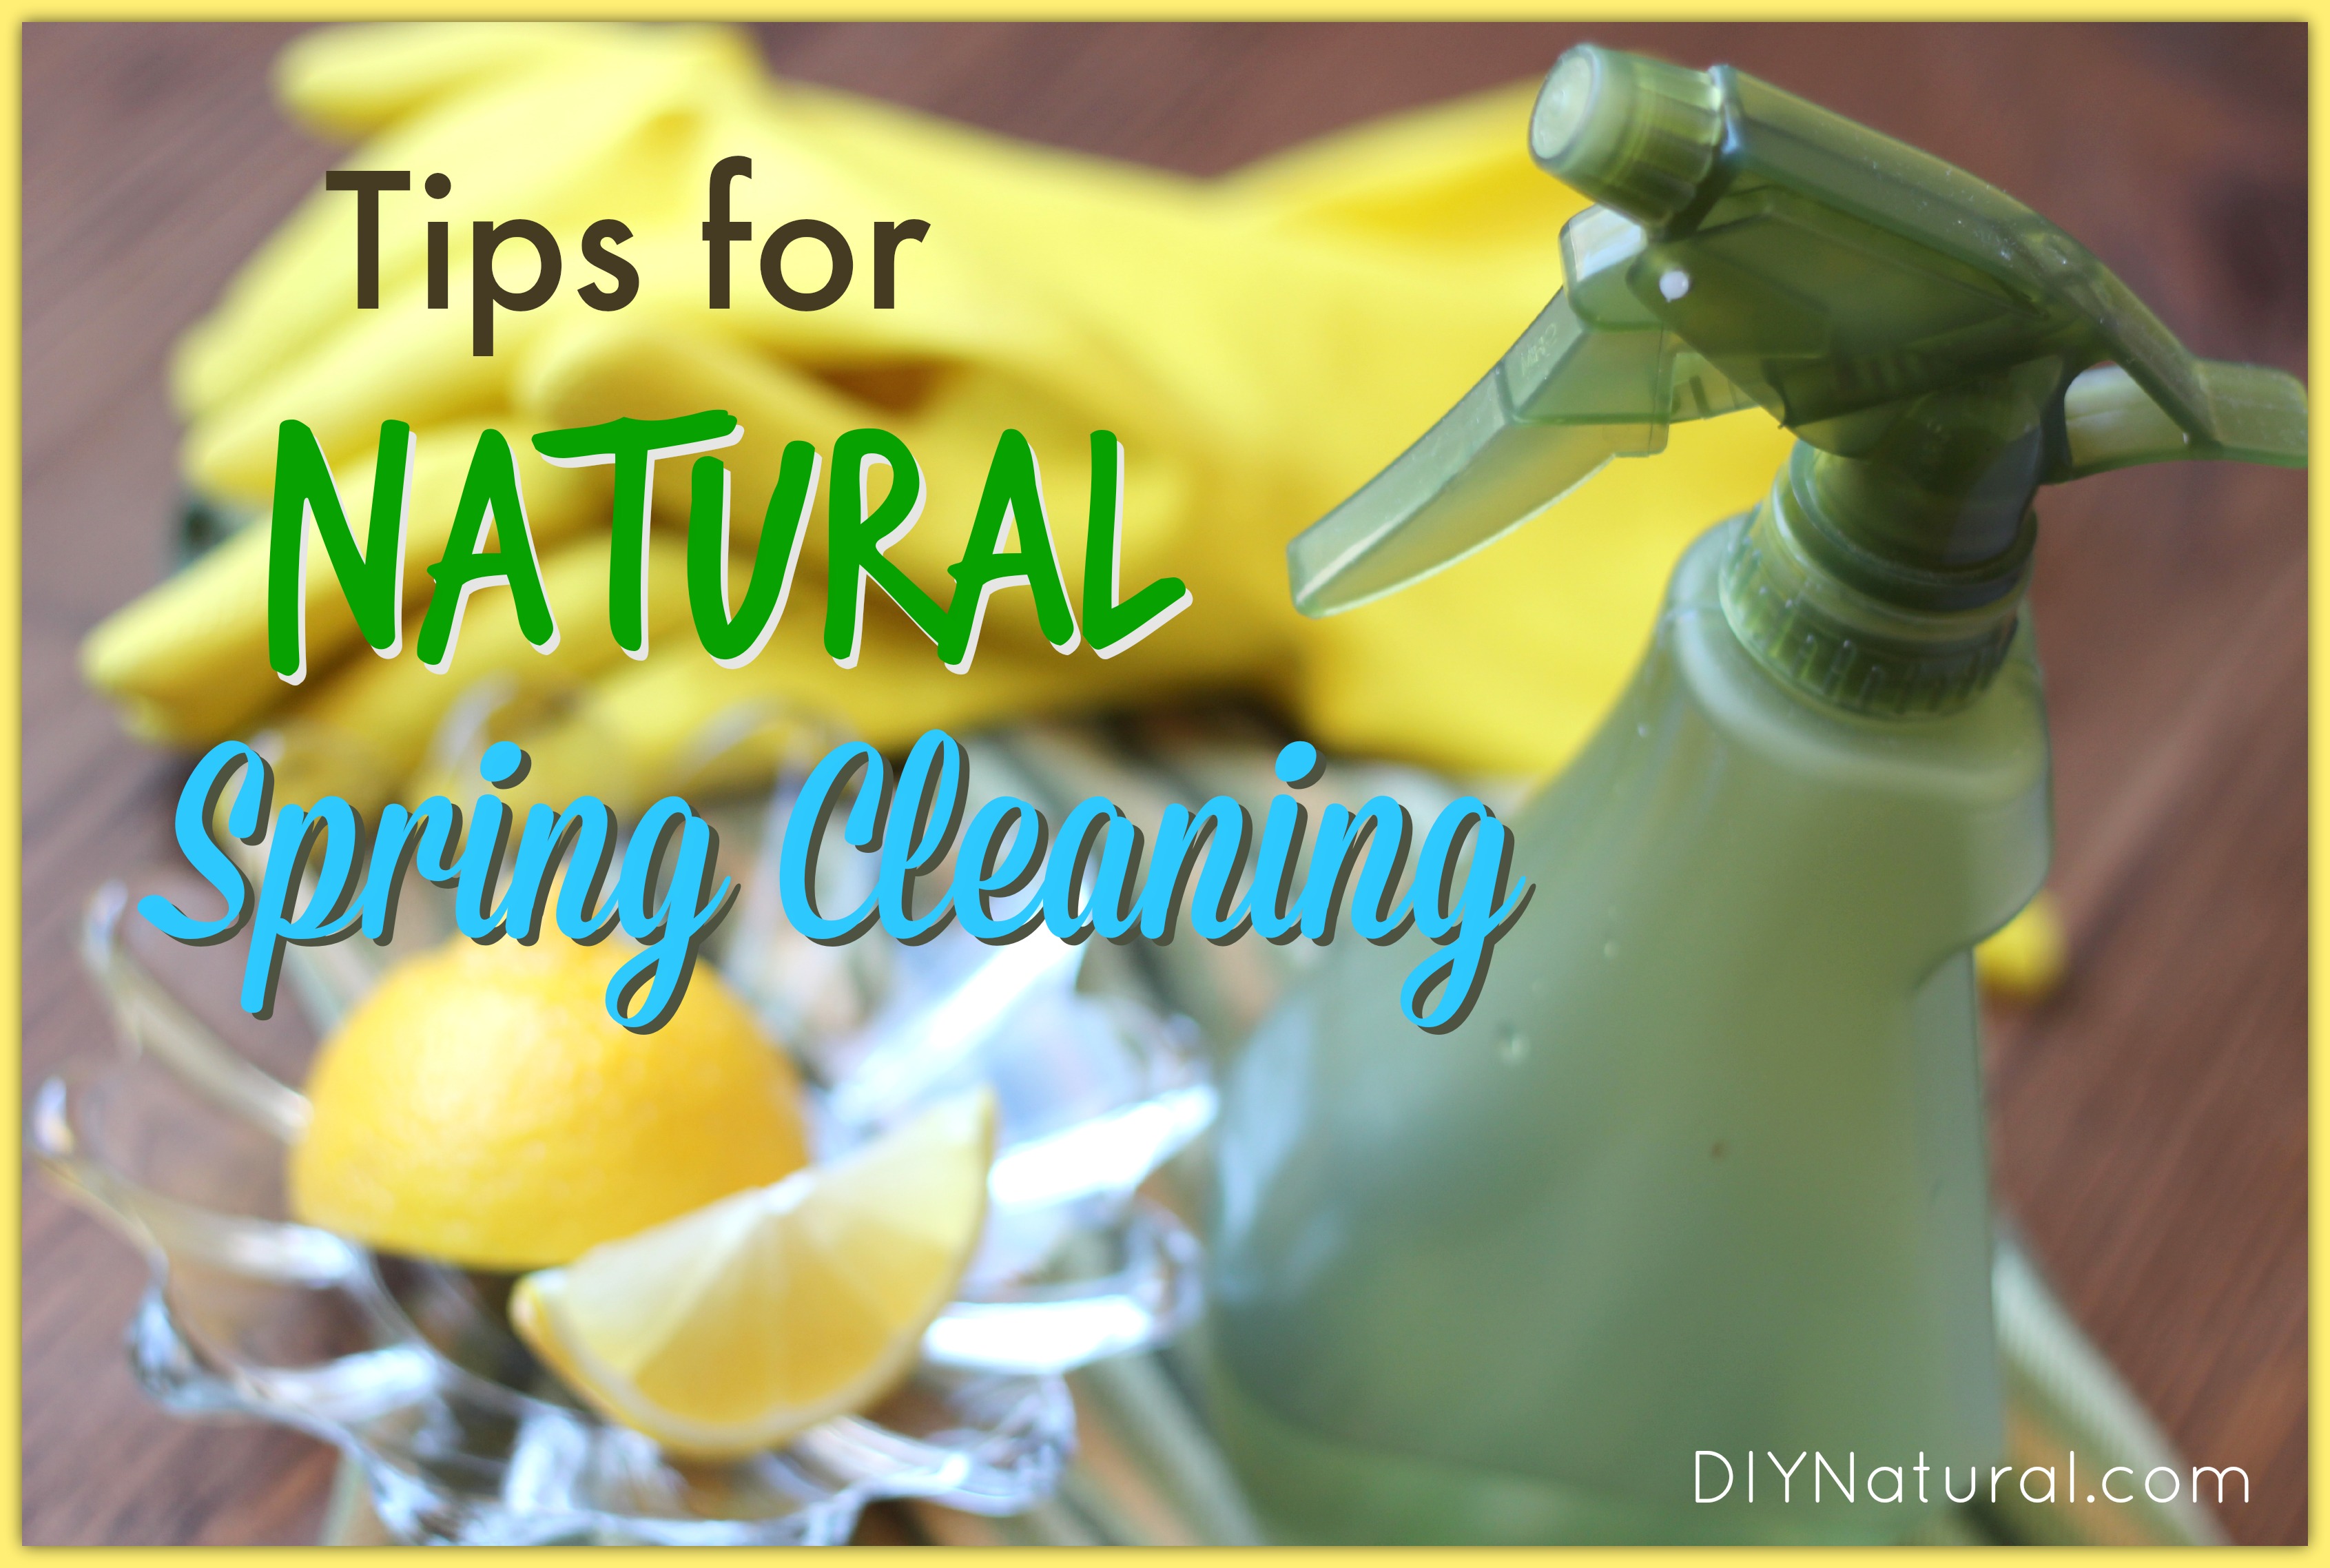 spring cleaning articles